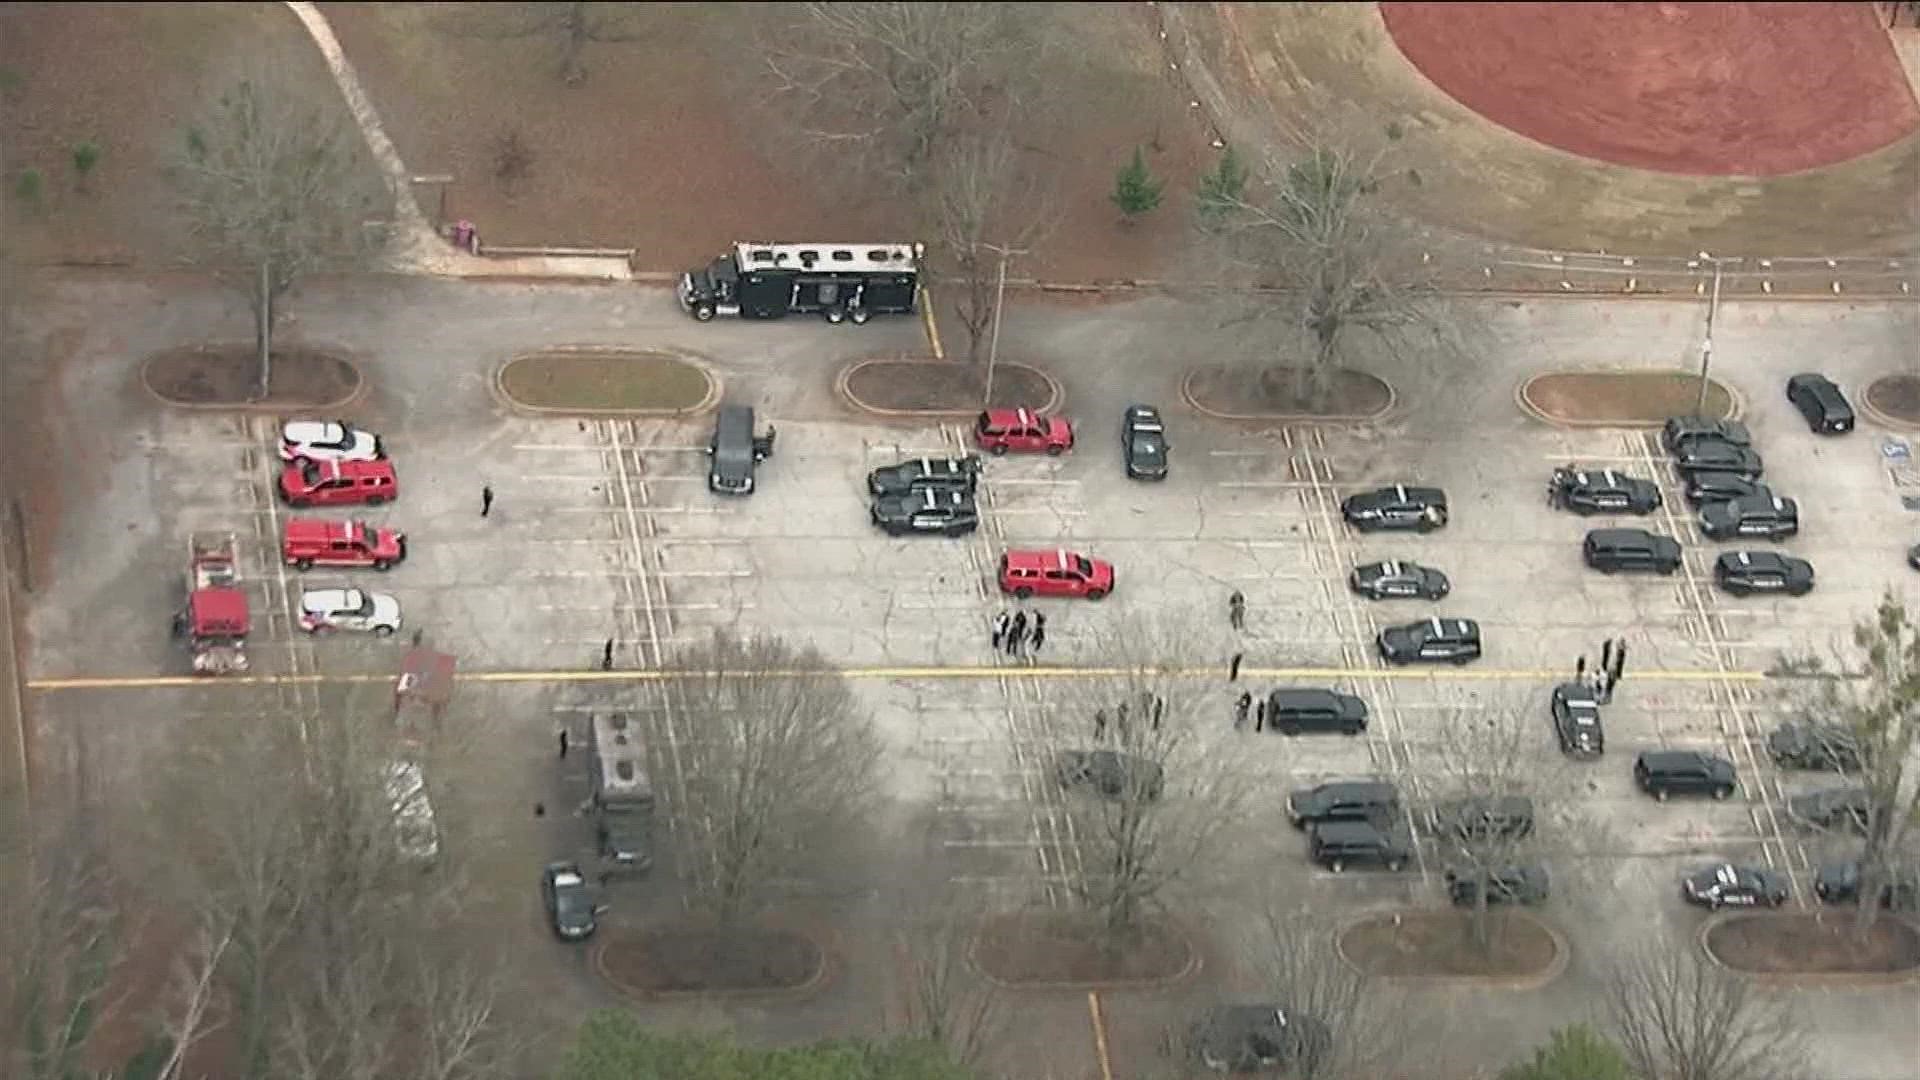 The Georgia Bureau of Investigation confirmed it was one of the responding agencies, and the 11Alive Sky Tracker flew over the site and observed APD on scene.